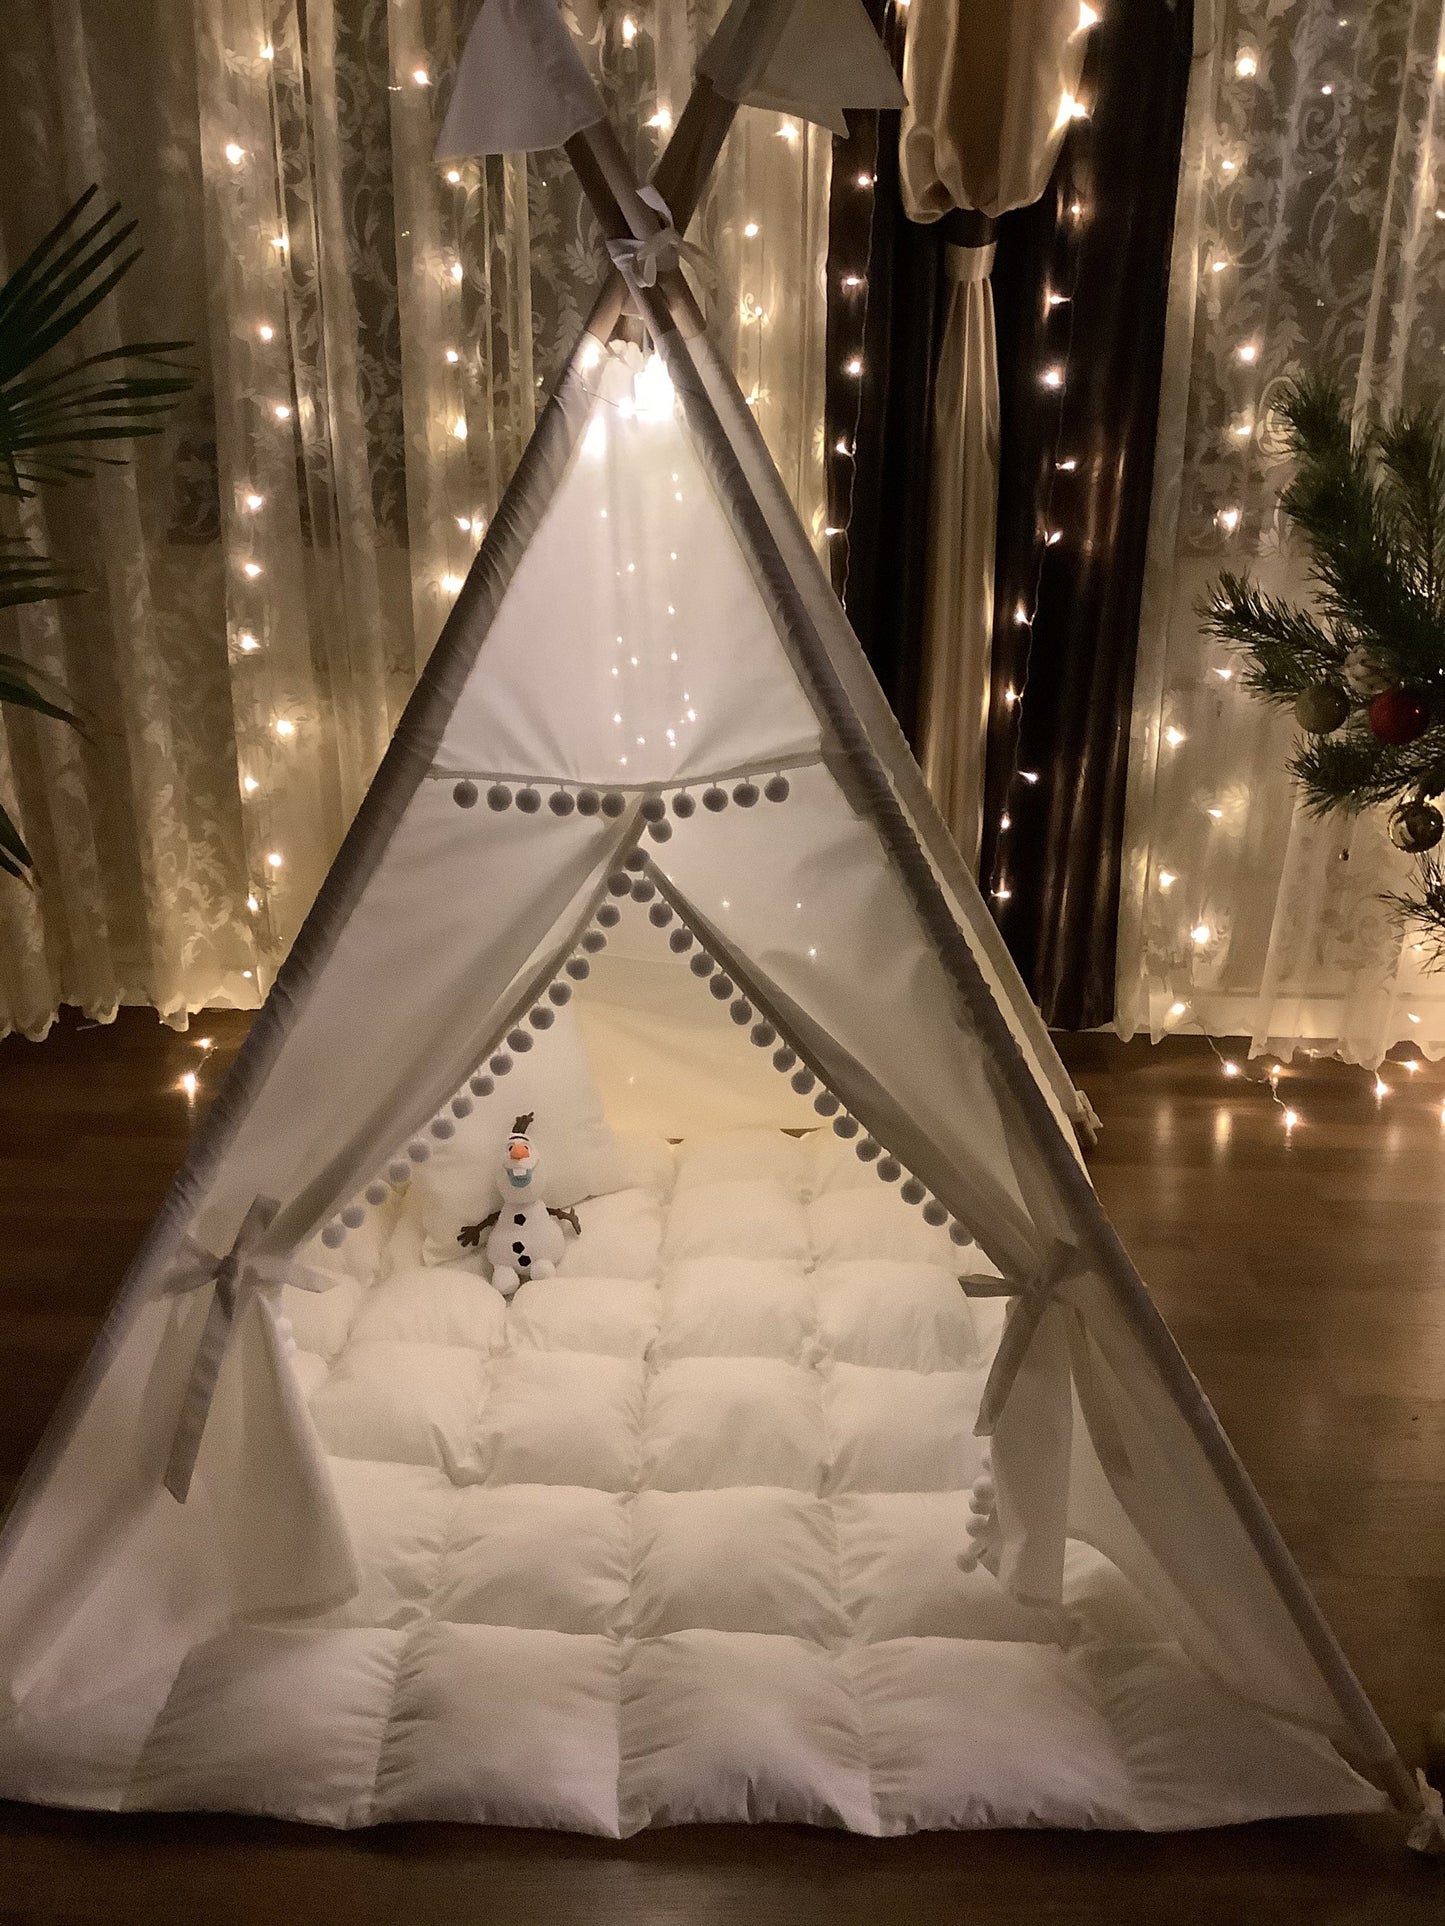 Teepees for kids, Tent Ivory ,Beige, Gray tent, Christmas gift Teepee, ecru fabric tent with Window Mat Tepee  for Girl montessori furniture